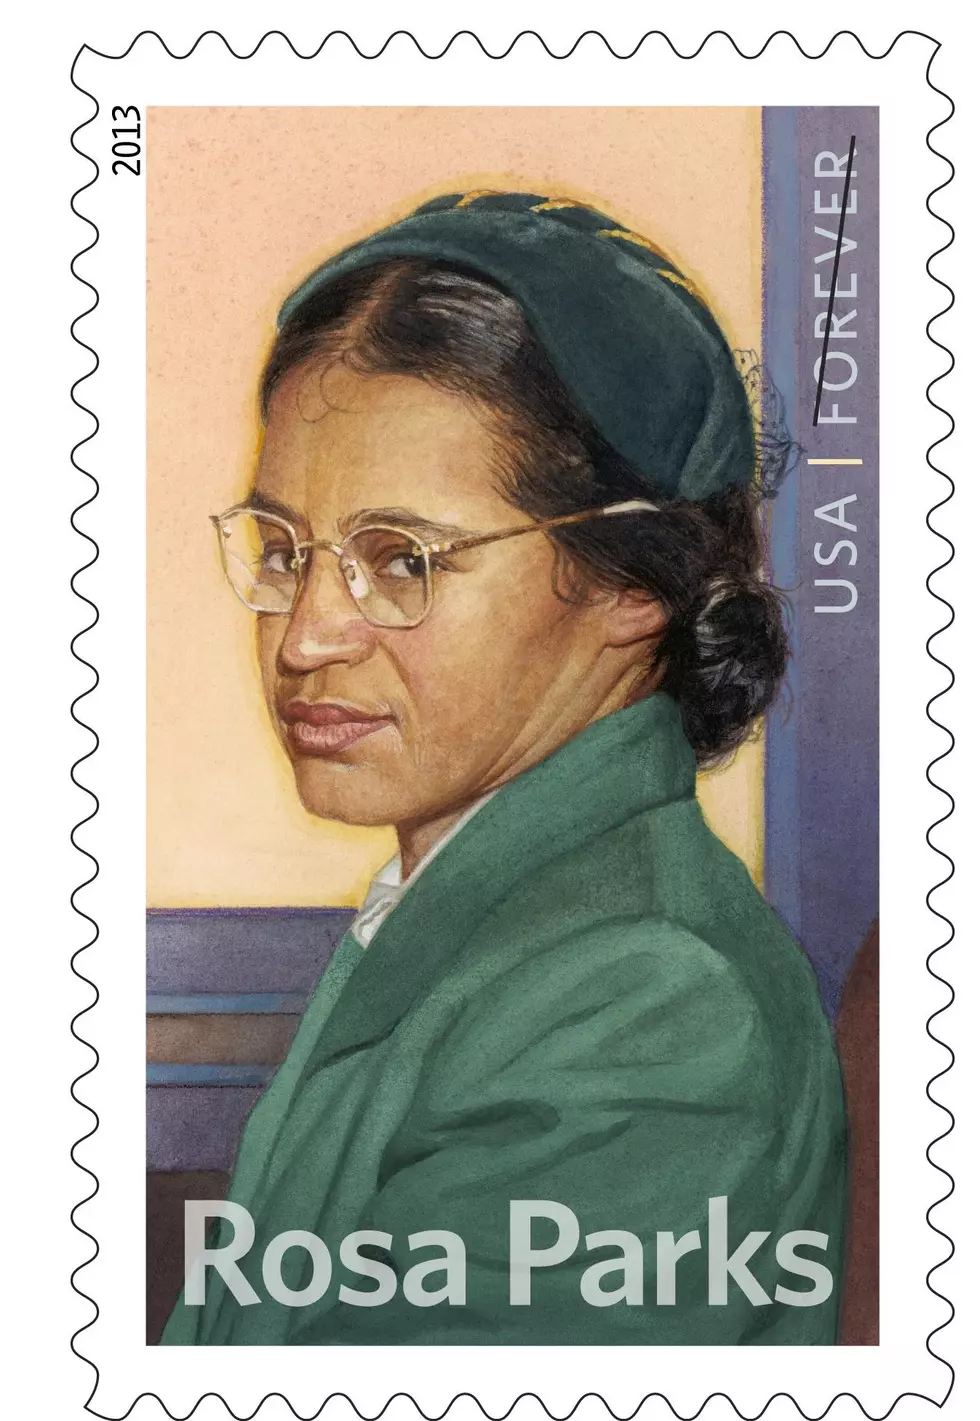 Today in History &#8211; Rosa Parks refuses to give up her seat on bus